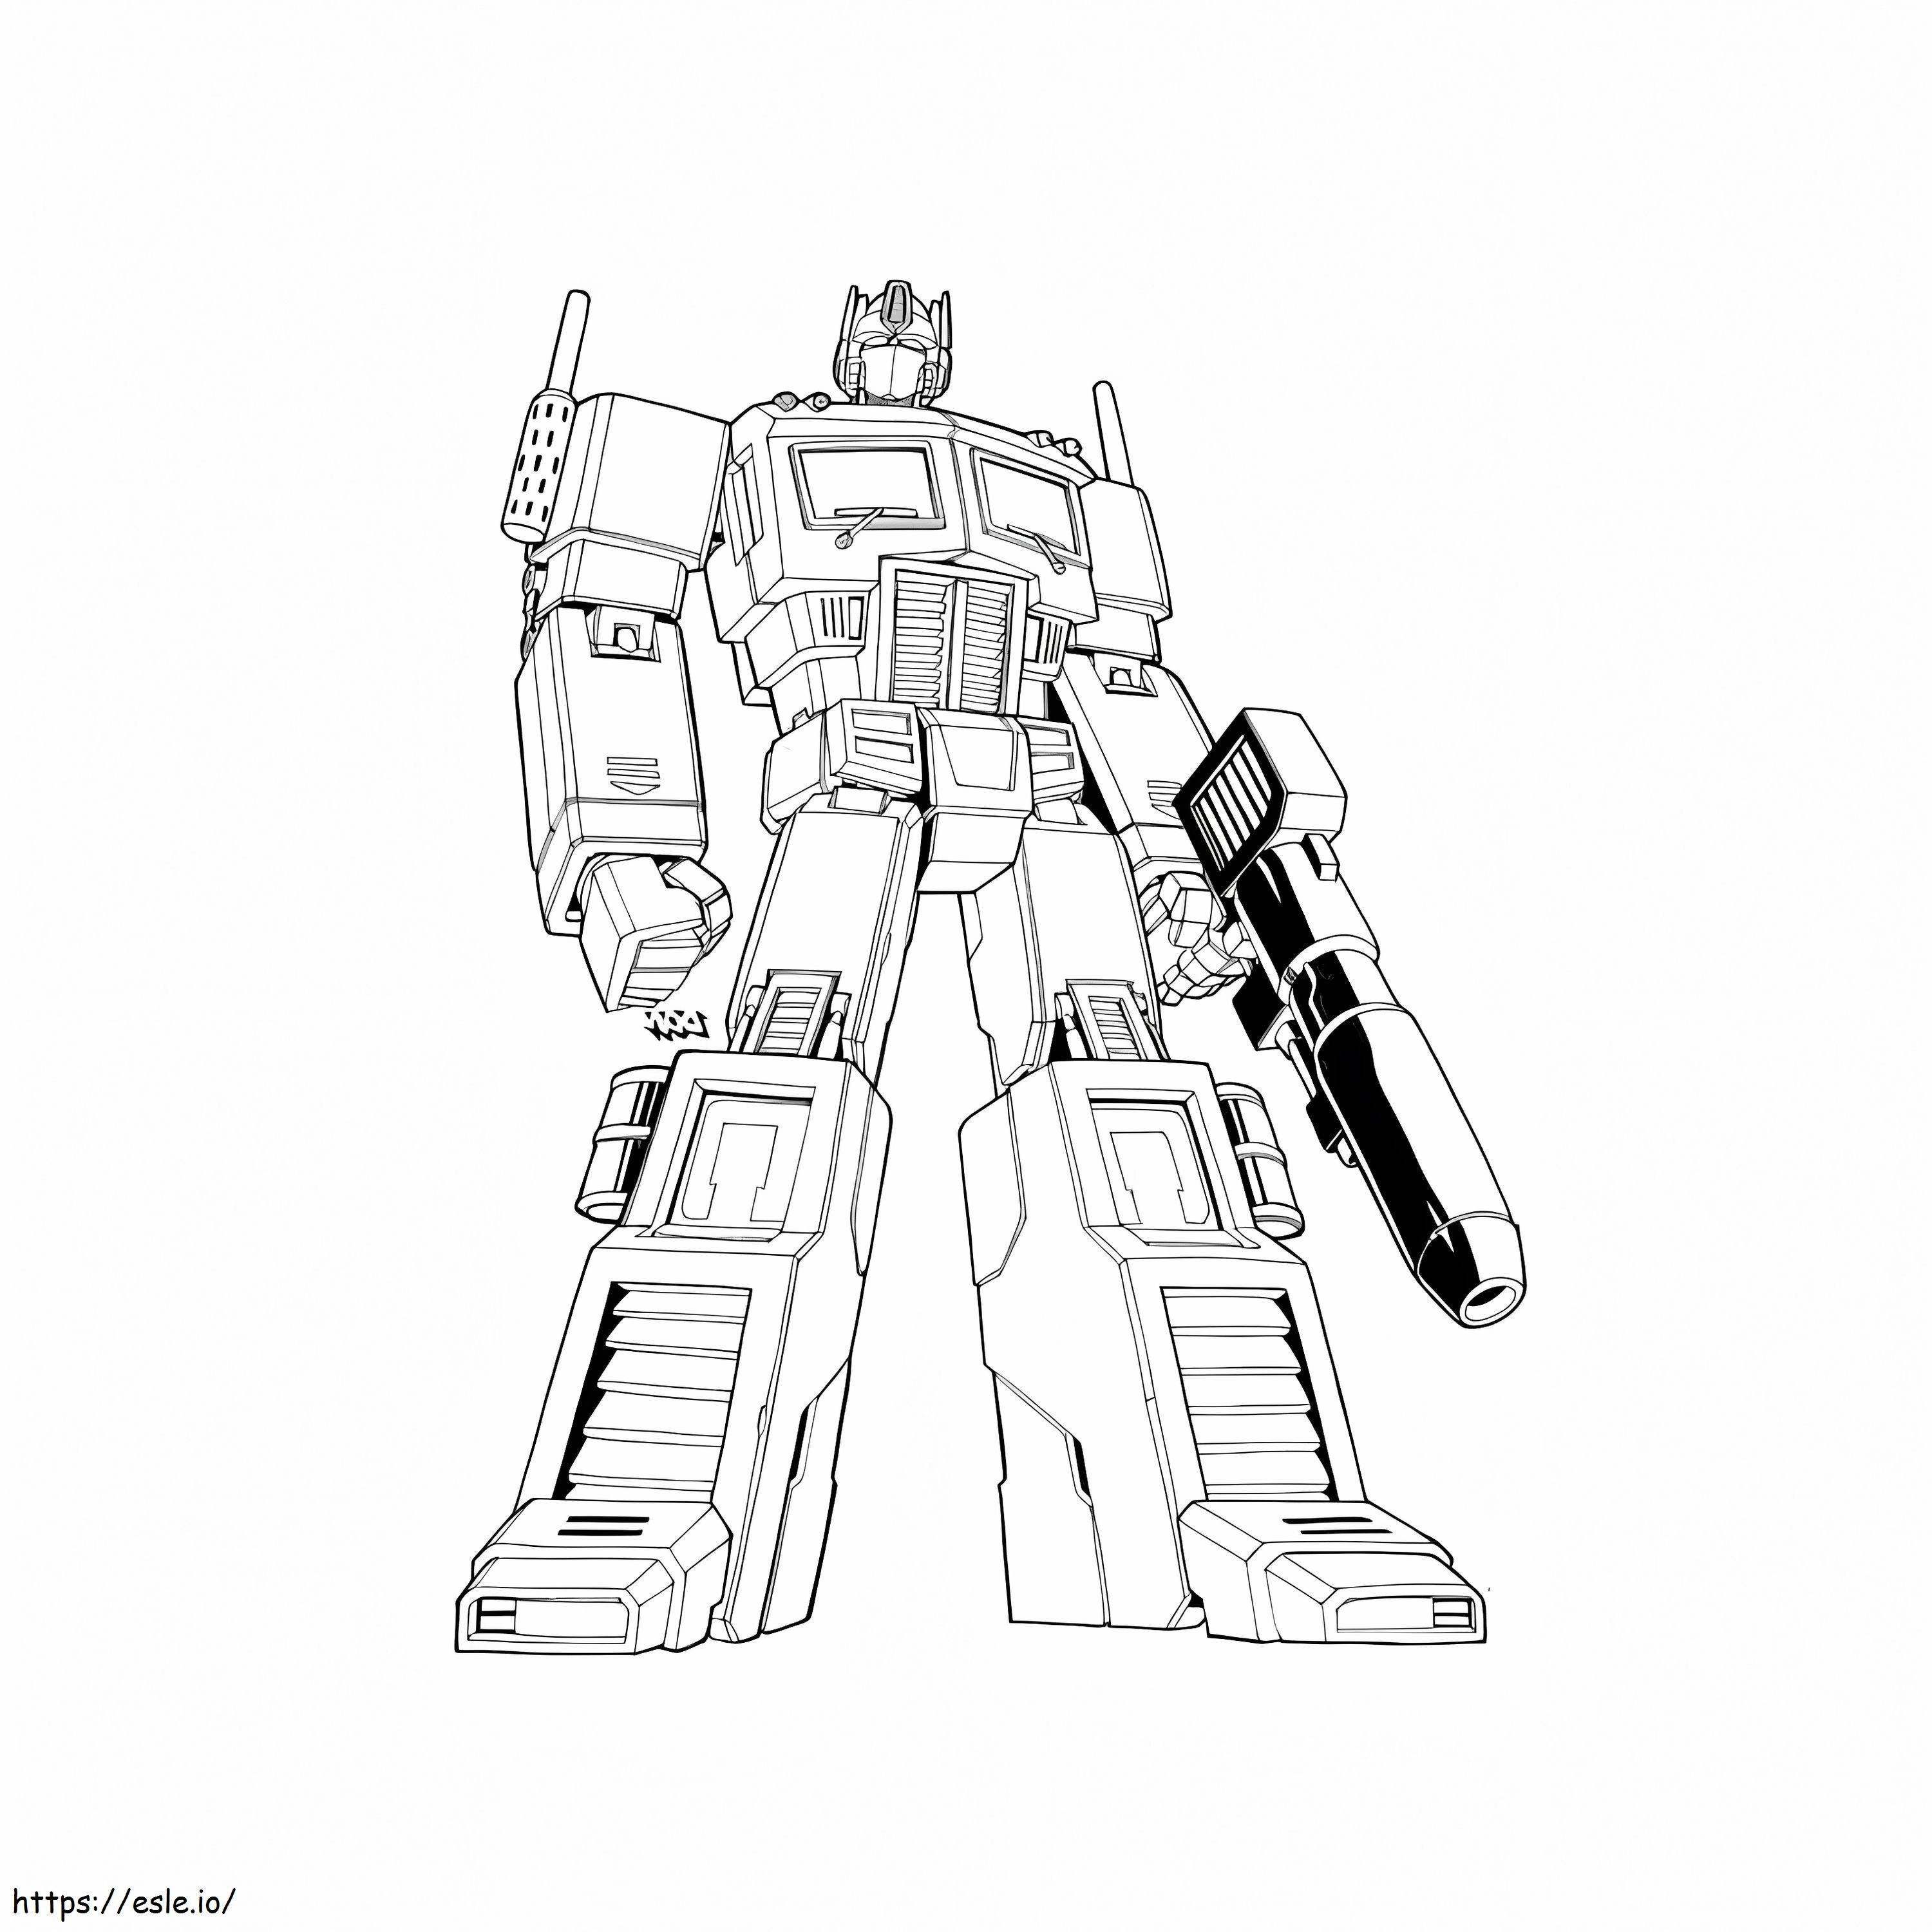 Awesome Optimus Prime coloring page